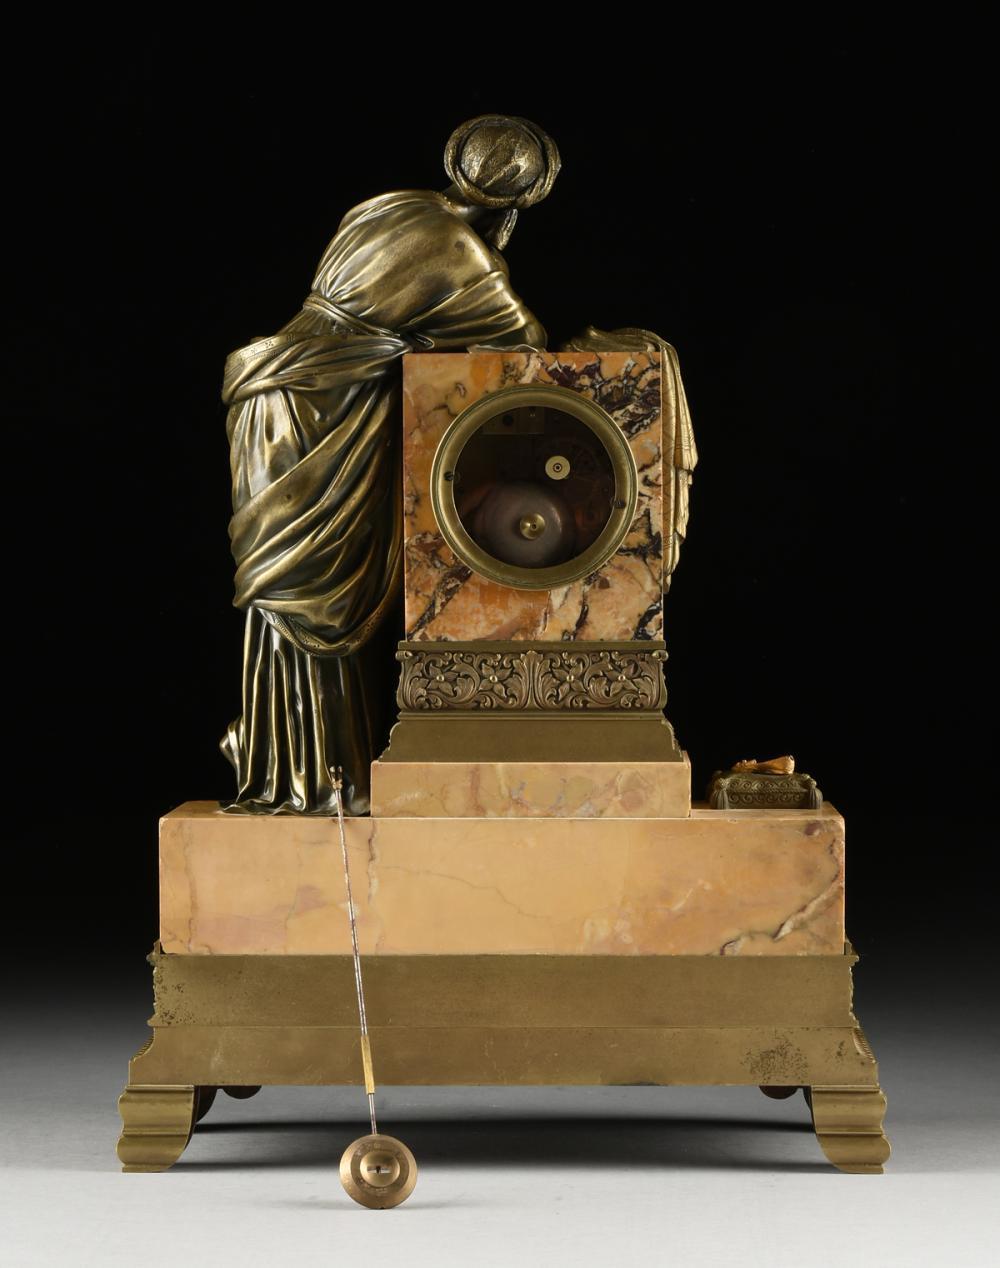 Mid 19th Century Orientalist Bronze Mounted Siena Marble Mantle Clock, France.
The classically robed maiden wearing an intricately detailed turban and holding a pen, while leaning on a block form pedestal draped with a shawl behind two lidded